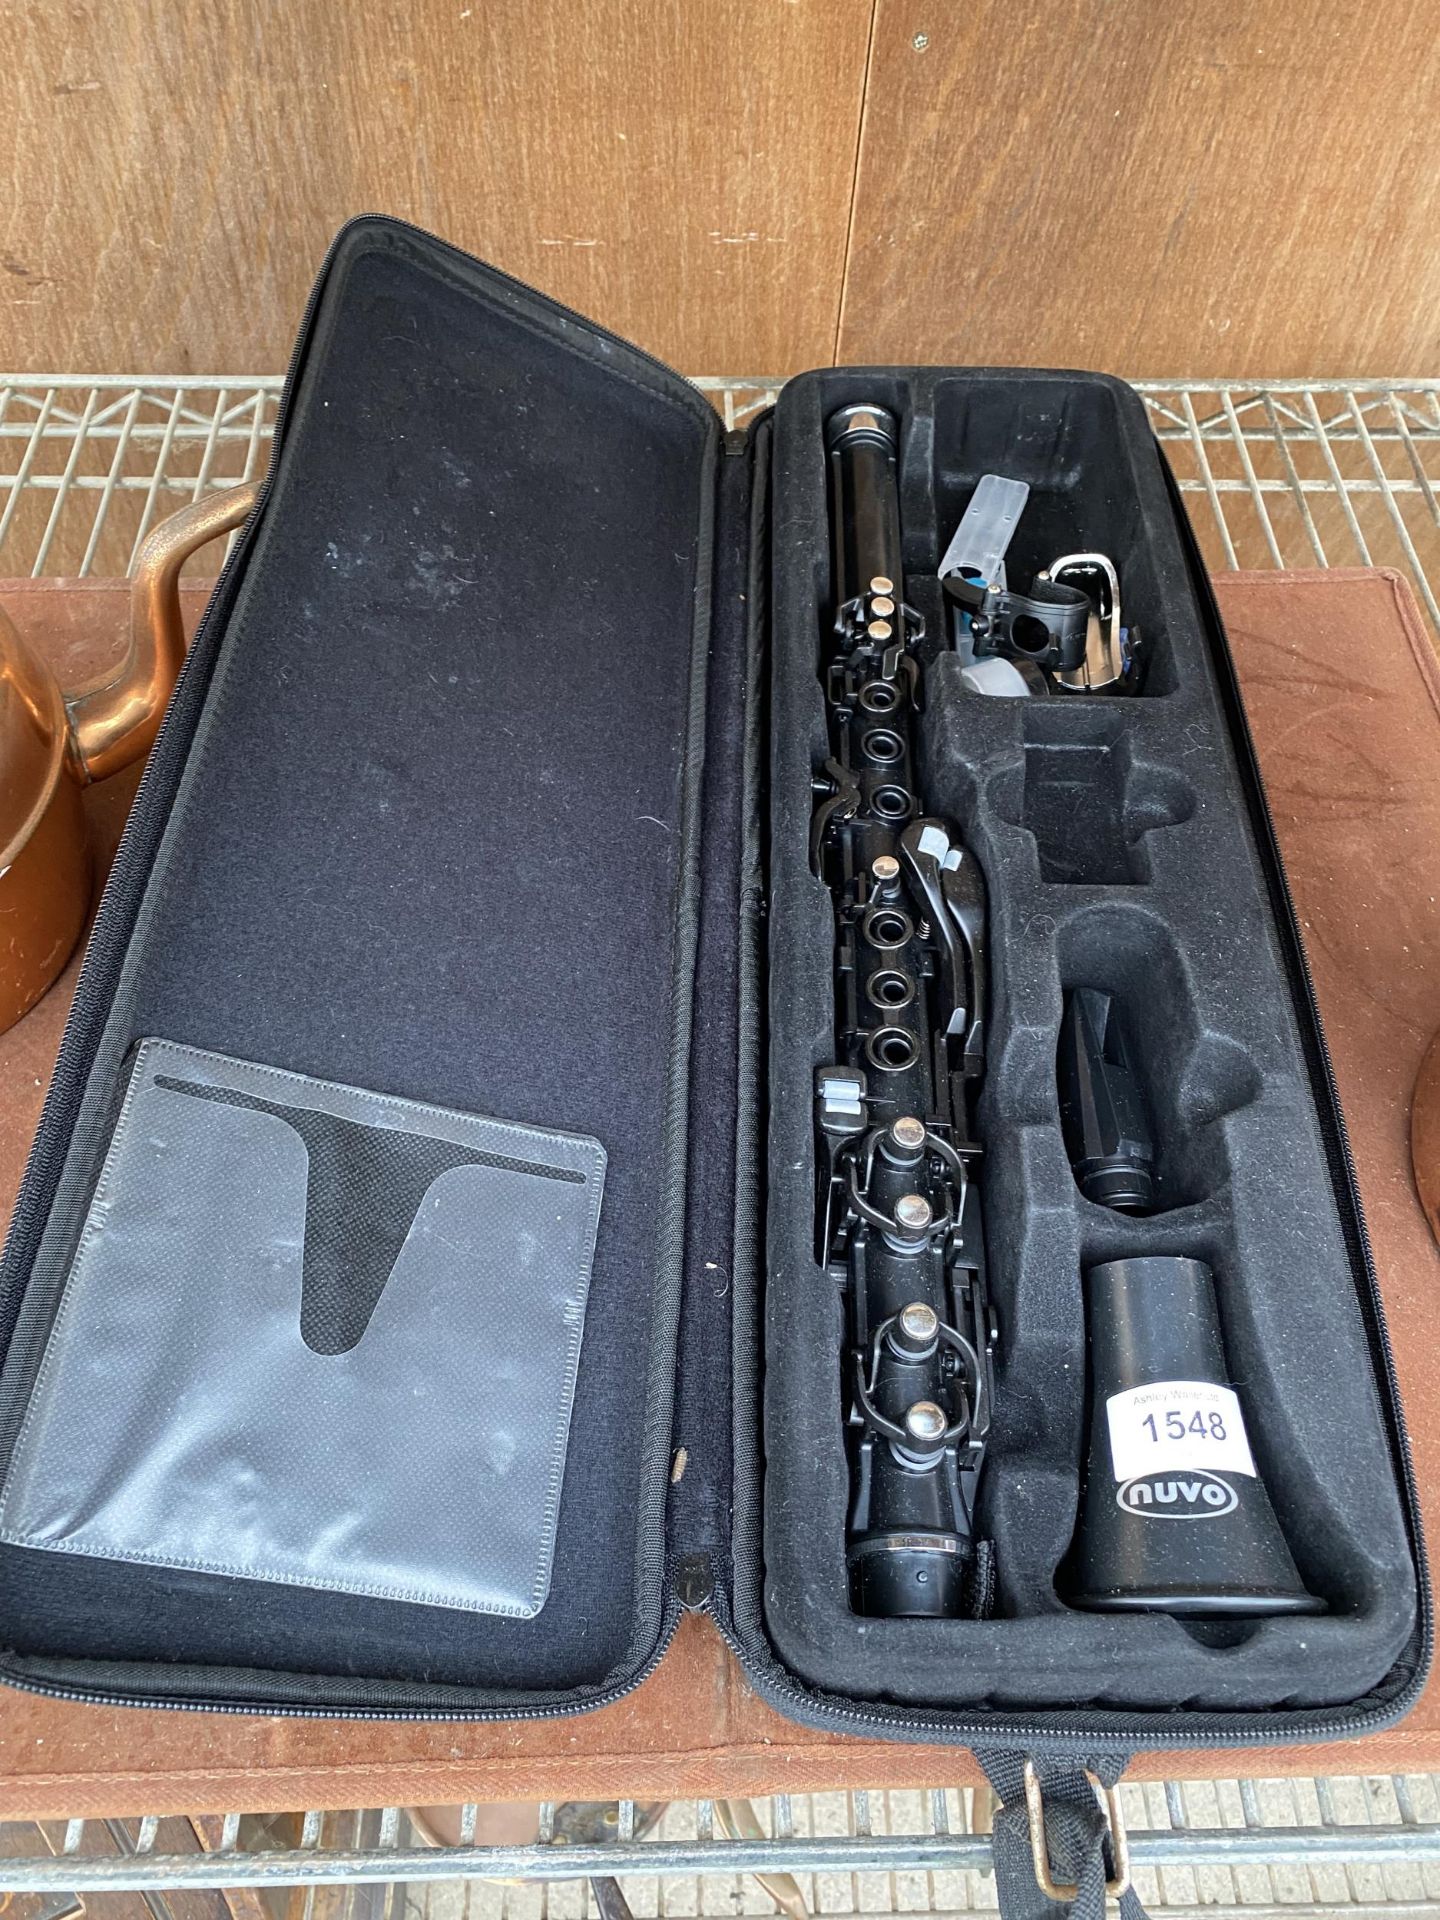 A PLASTIC NUVO CLARINET WITH CARRY CASE